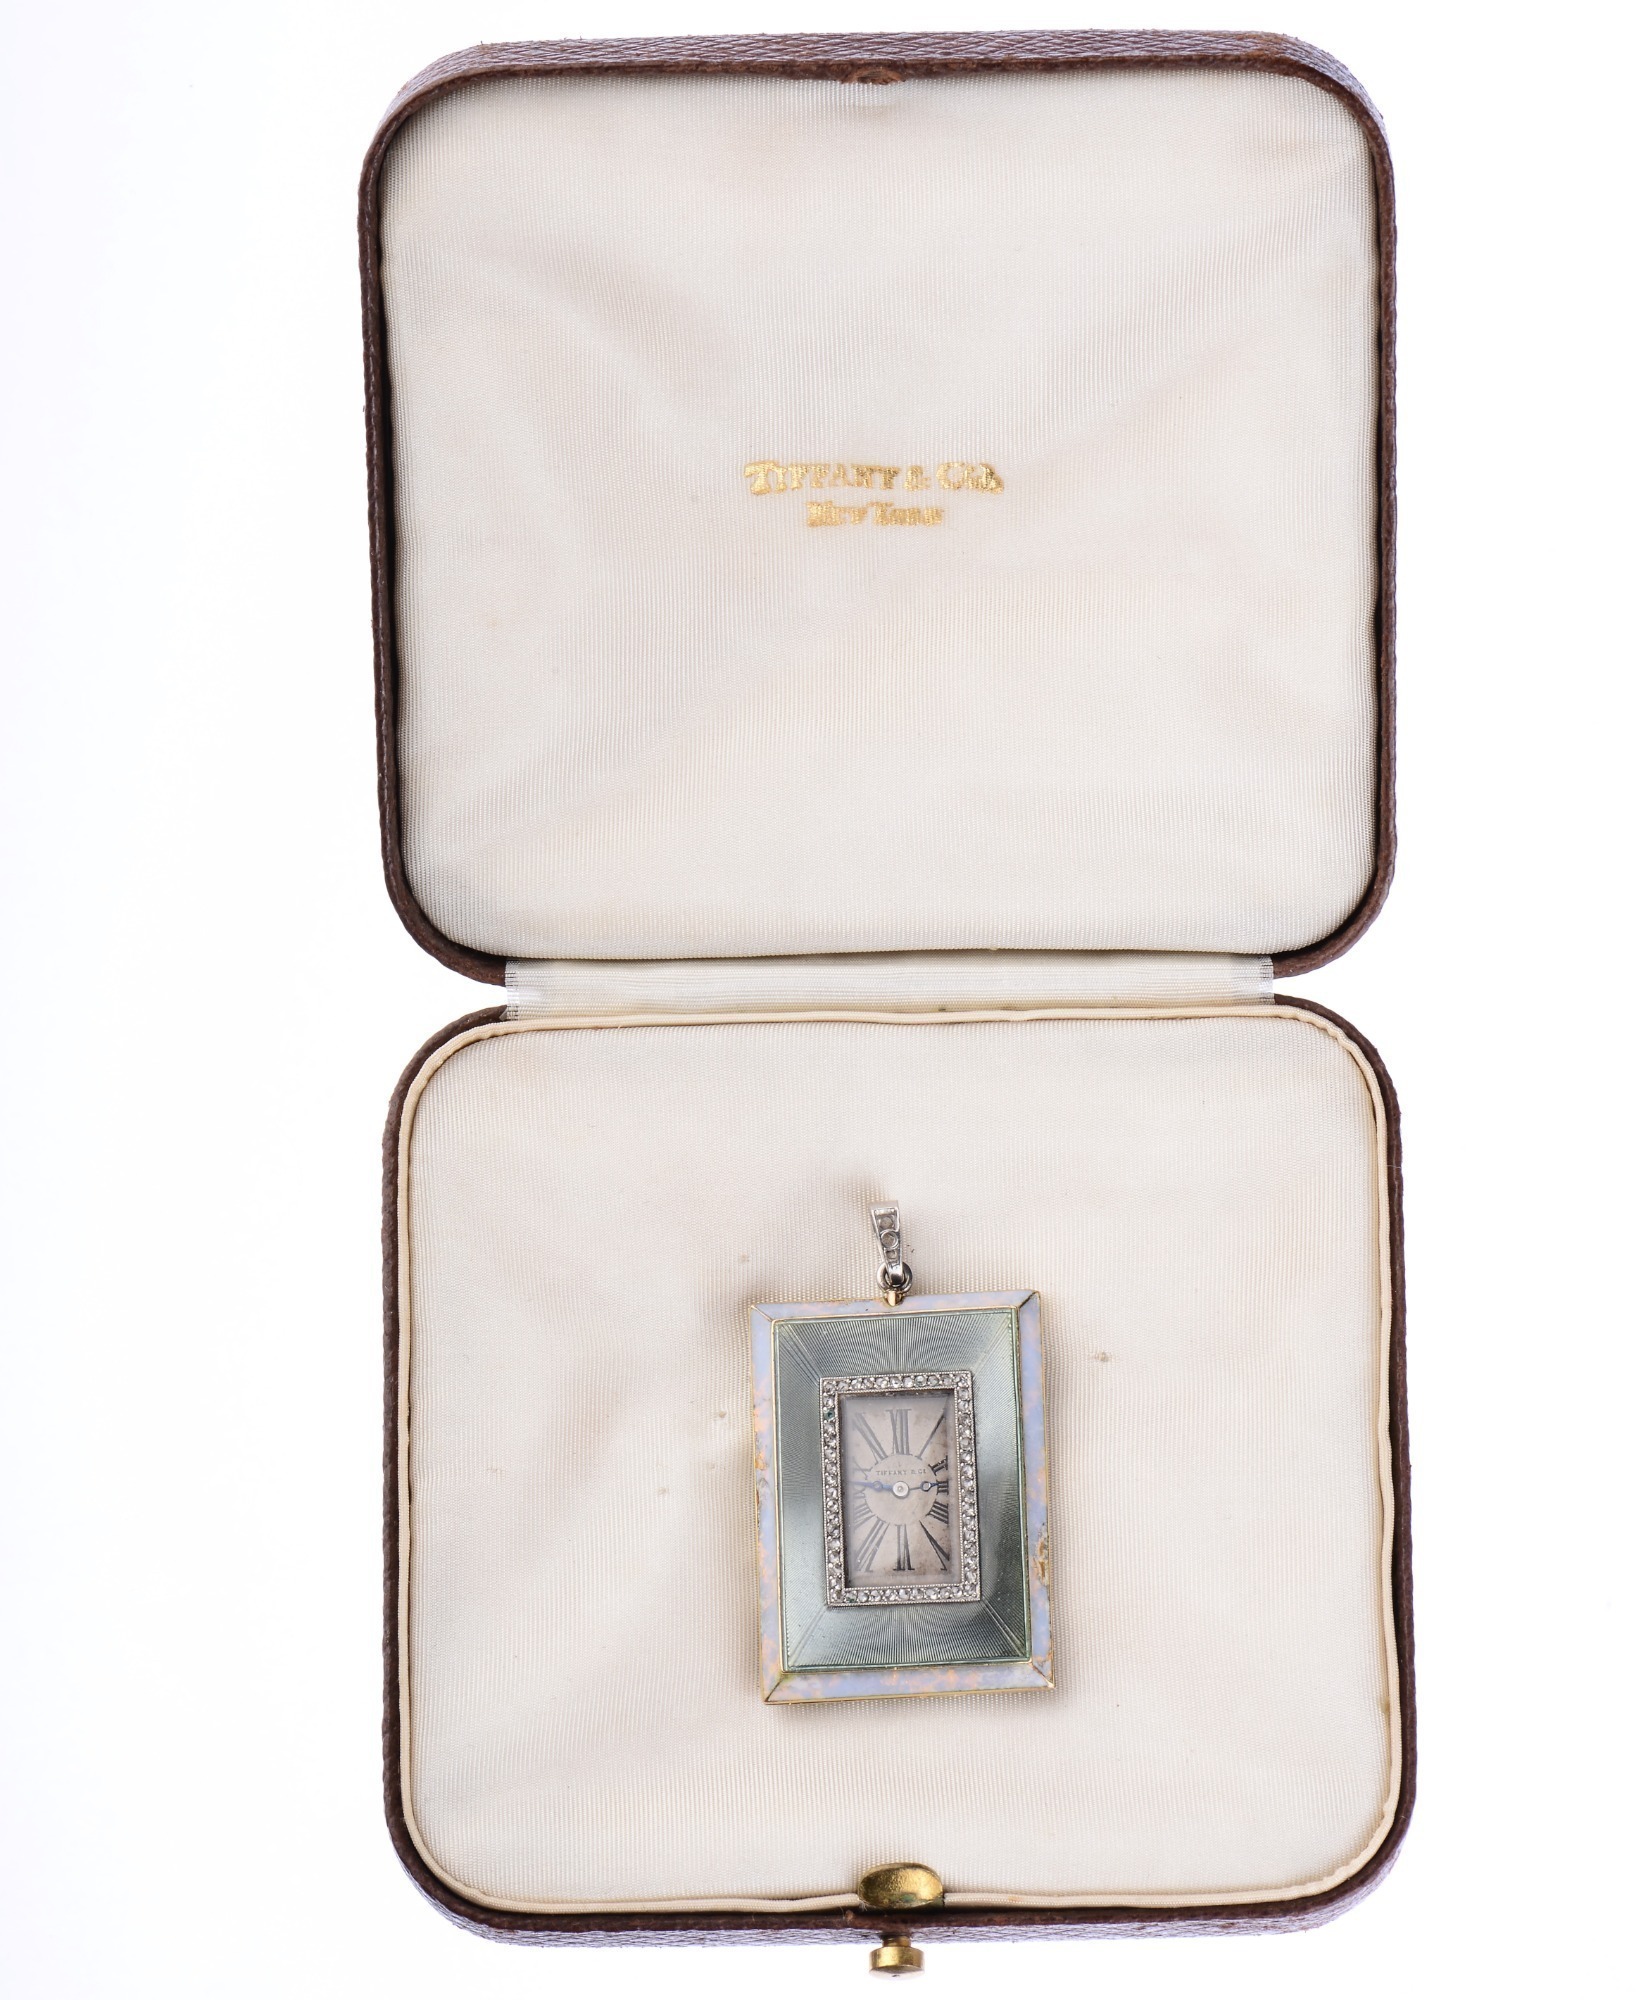 Tiffany and Co. Edwardian Enamel and Diamond 18K Gold And Platinum Case Rectangular Pendant Watch By Verger